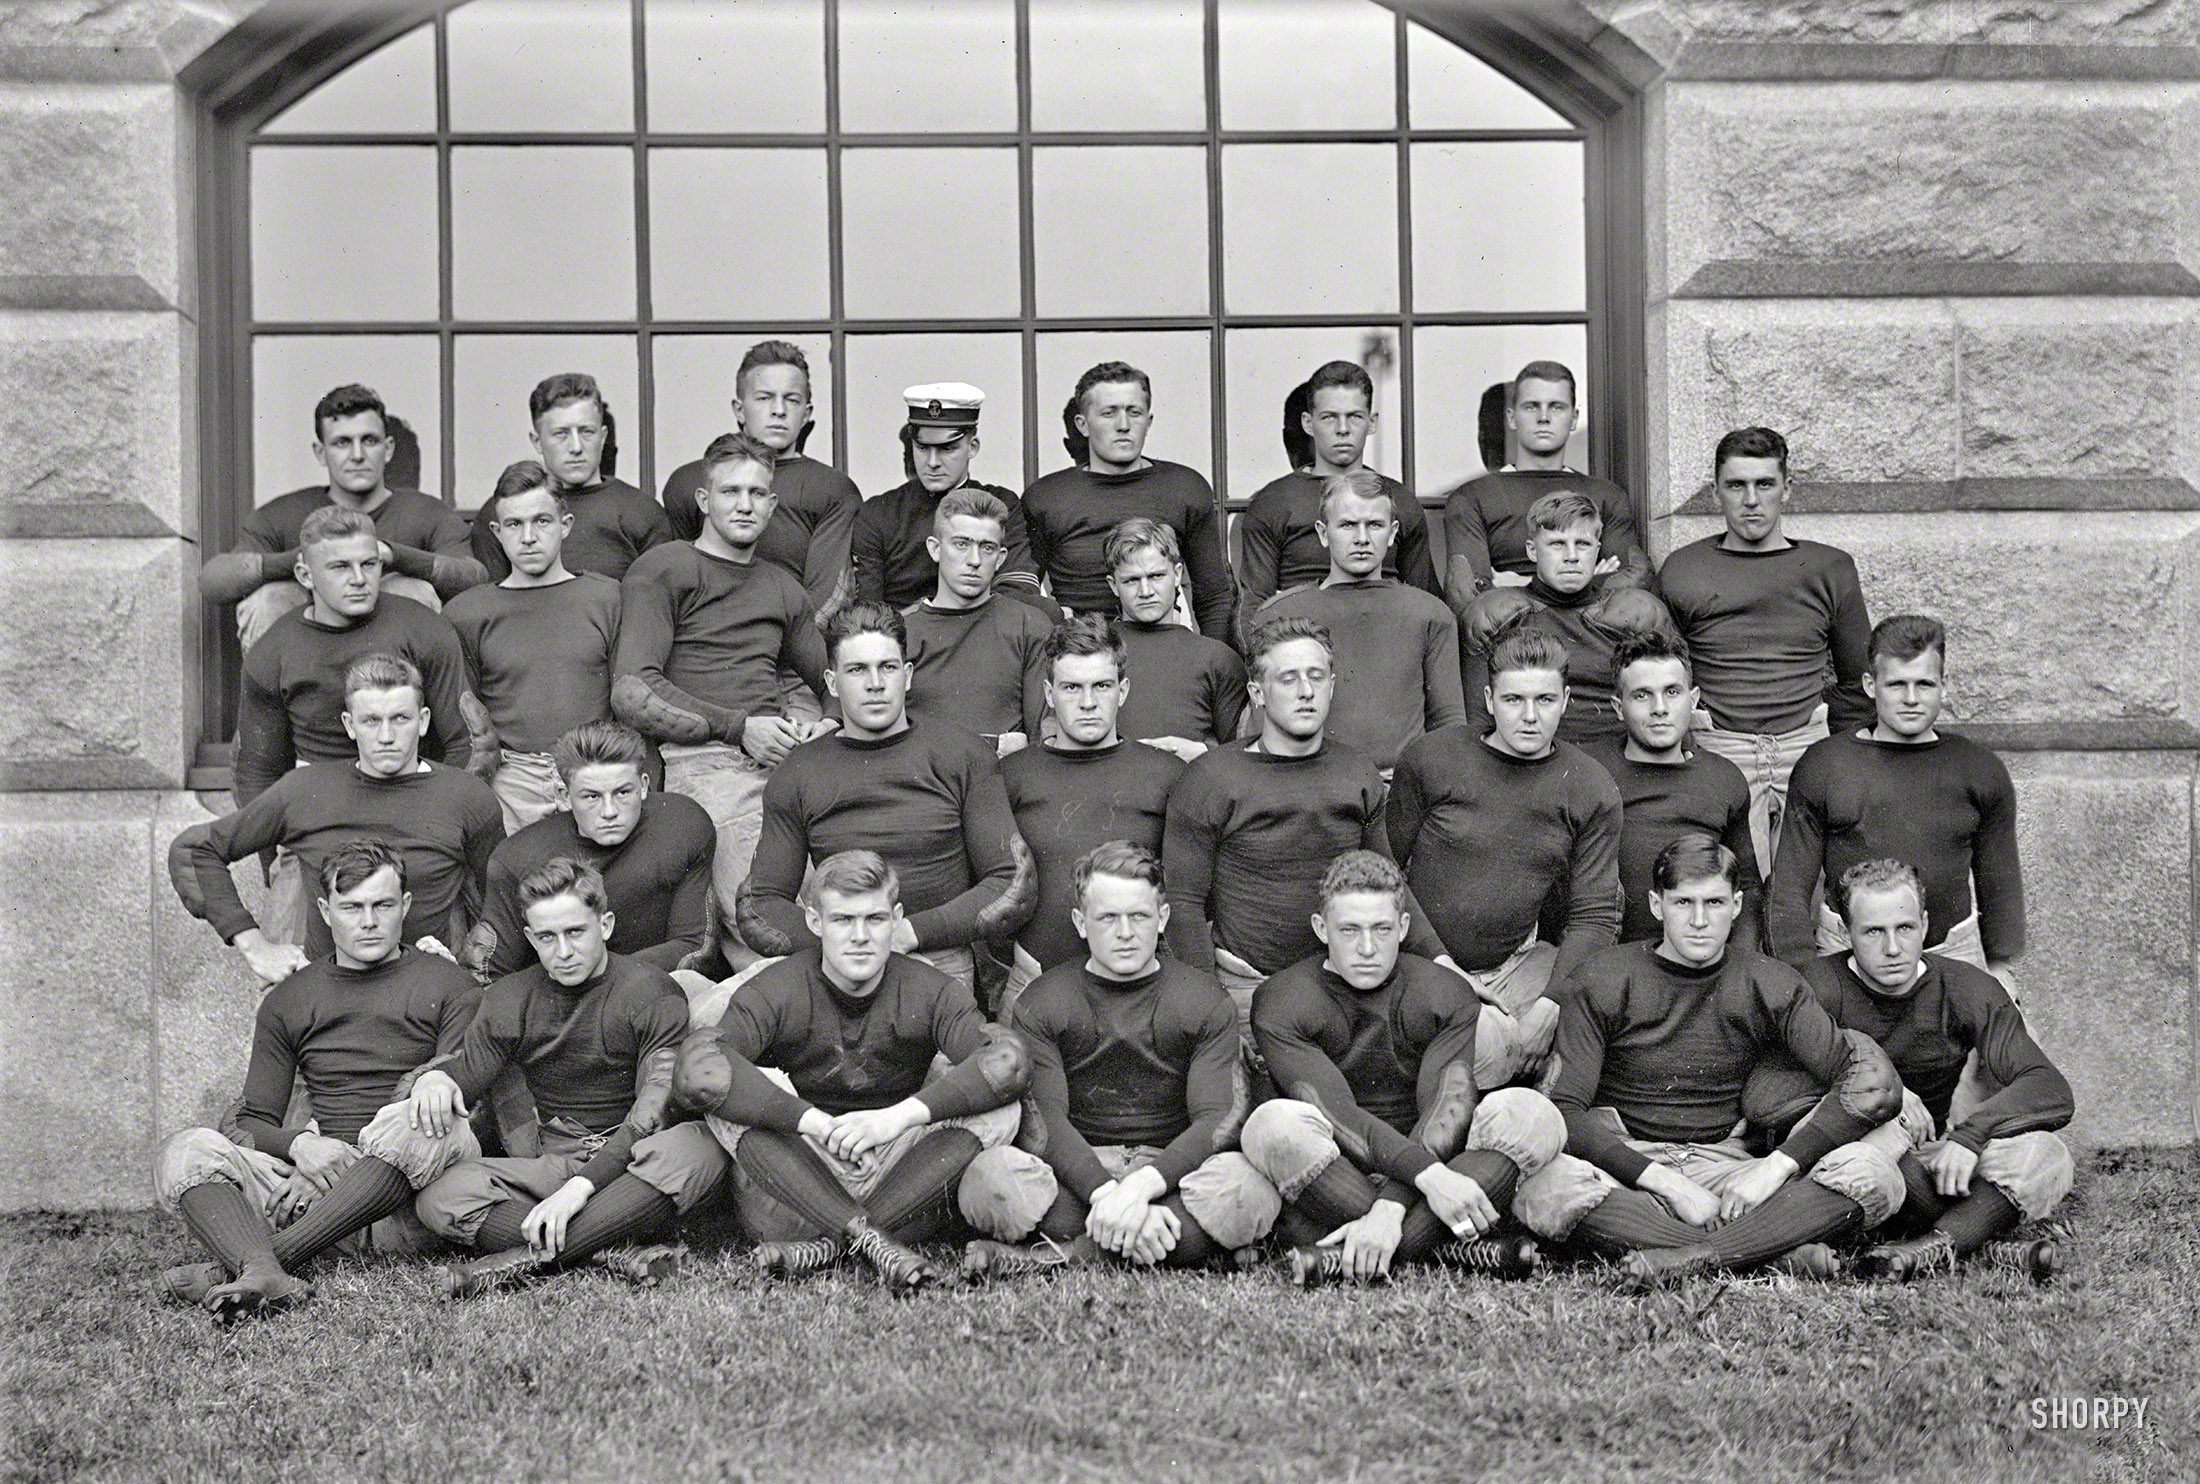 1913. Annapolis, Maryland. "U.S. Naval Academy football team." With chalked-on jersey numbers. Harris & Ewing glass negative. View full size.